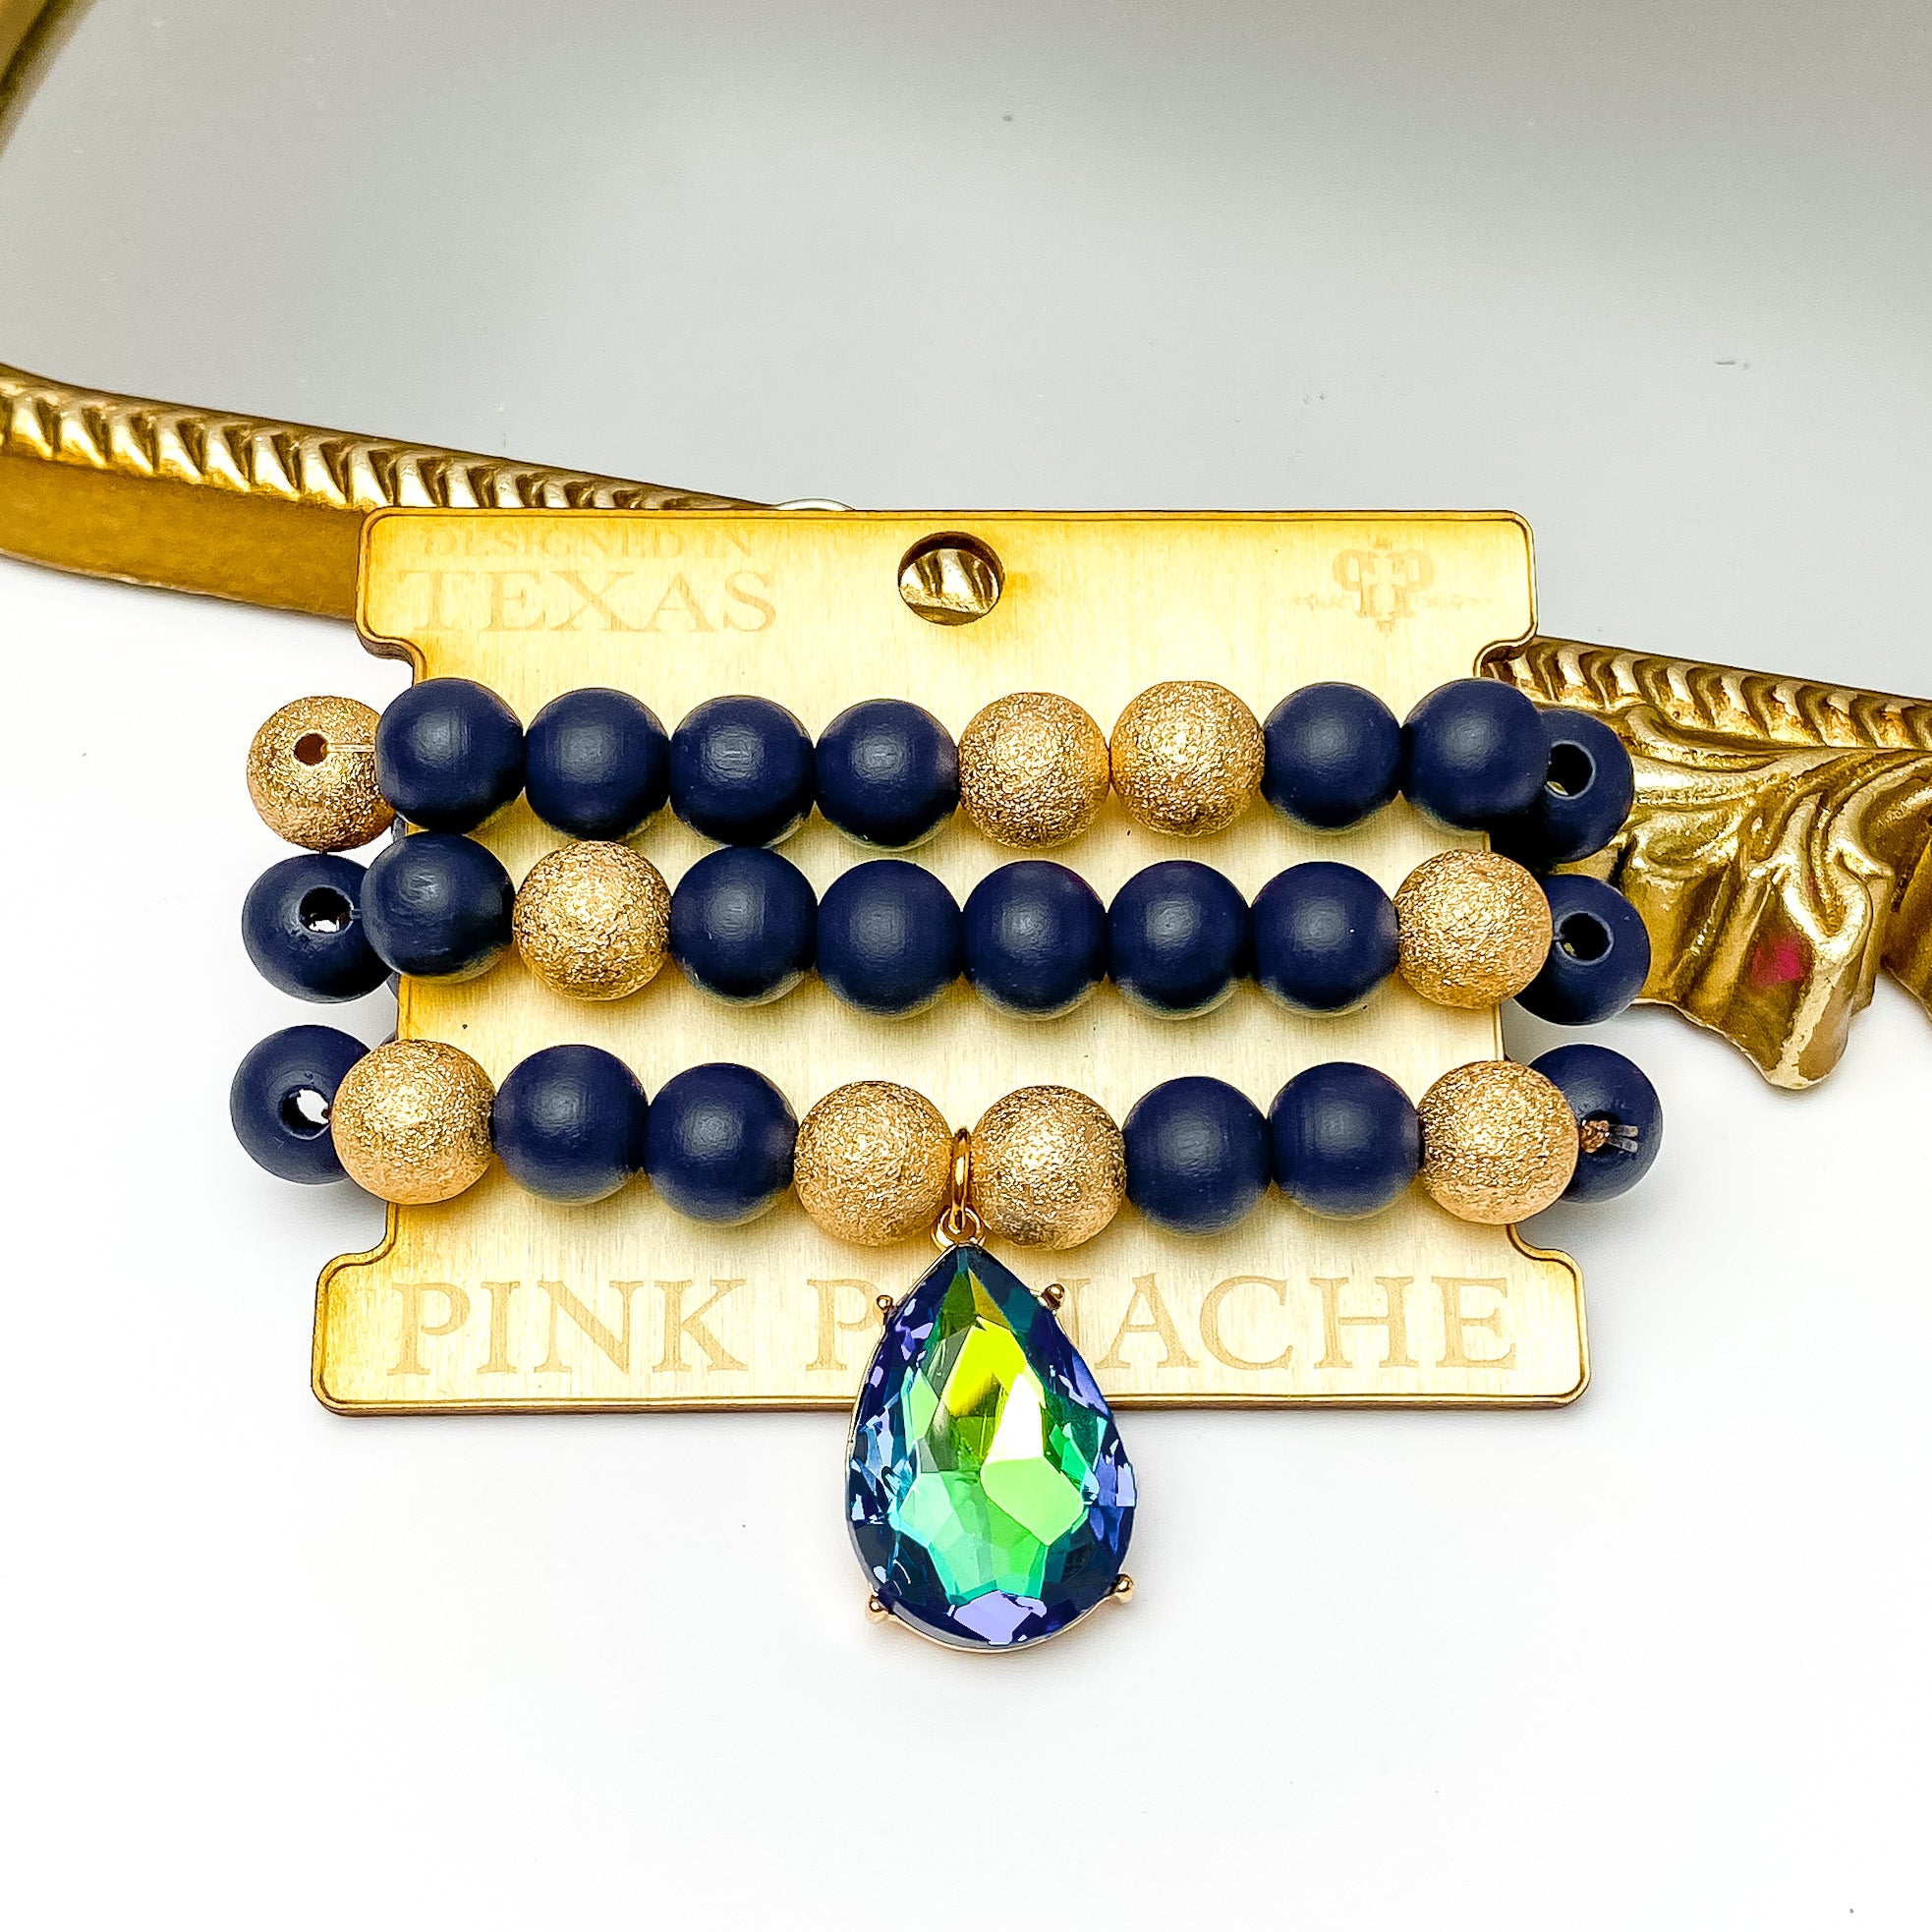 Pink Panache | Navy and Gold Tone Beaded Bracelet Set with Large Black AB Crystal Teardrop